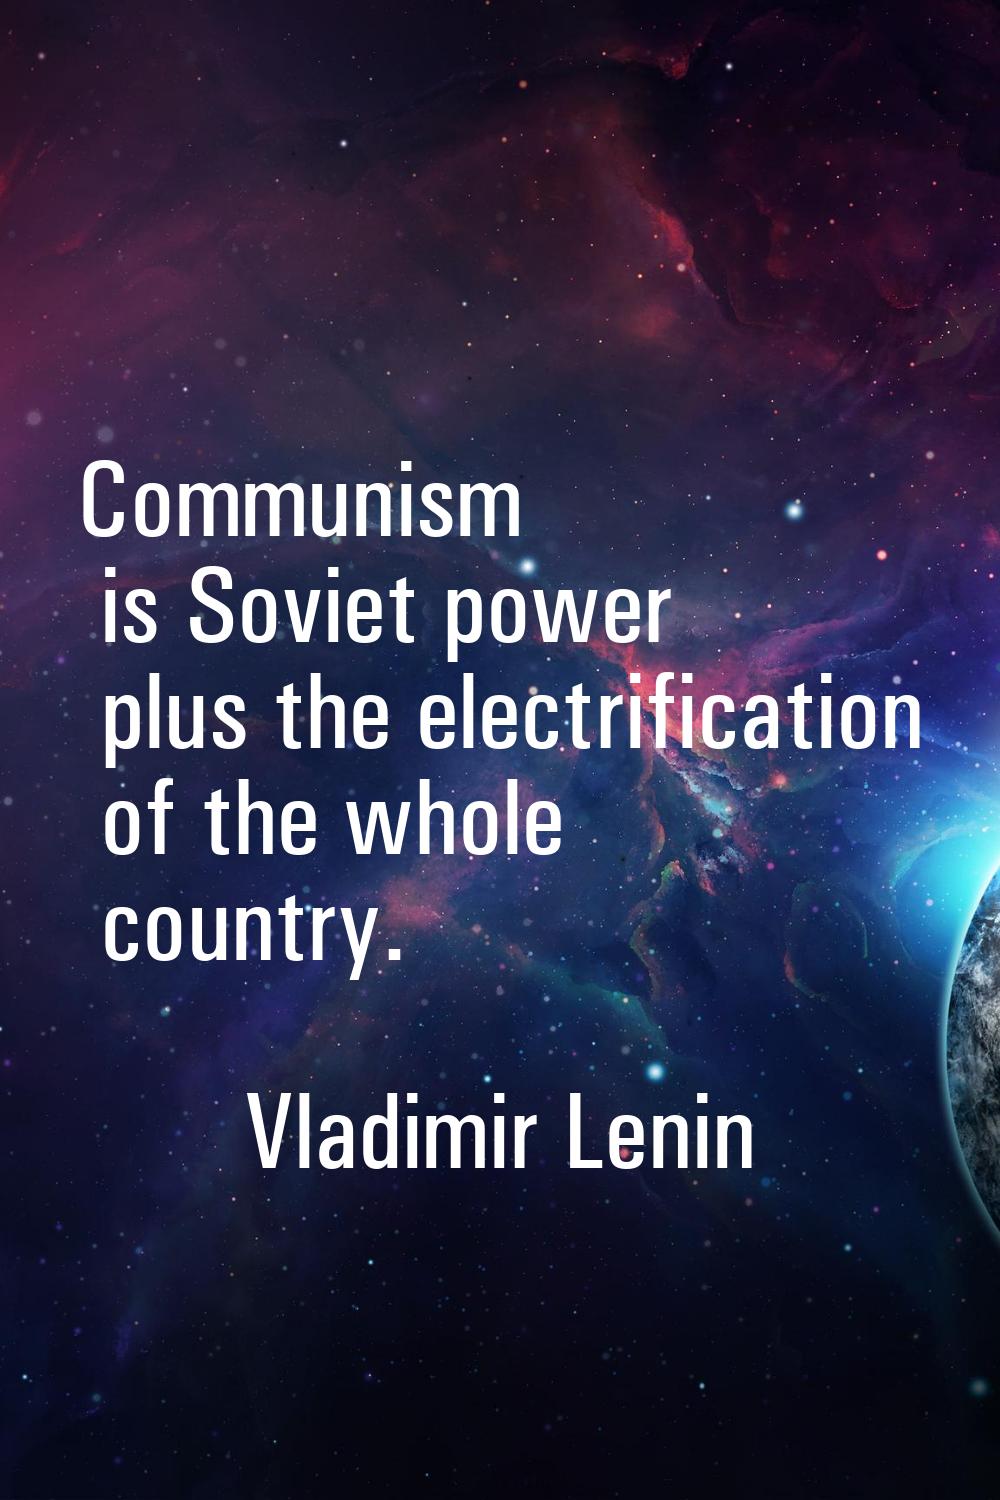 Communism is Soviet power plus the electrification of the whole country.